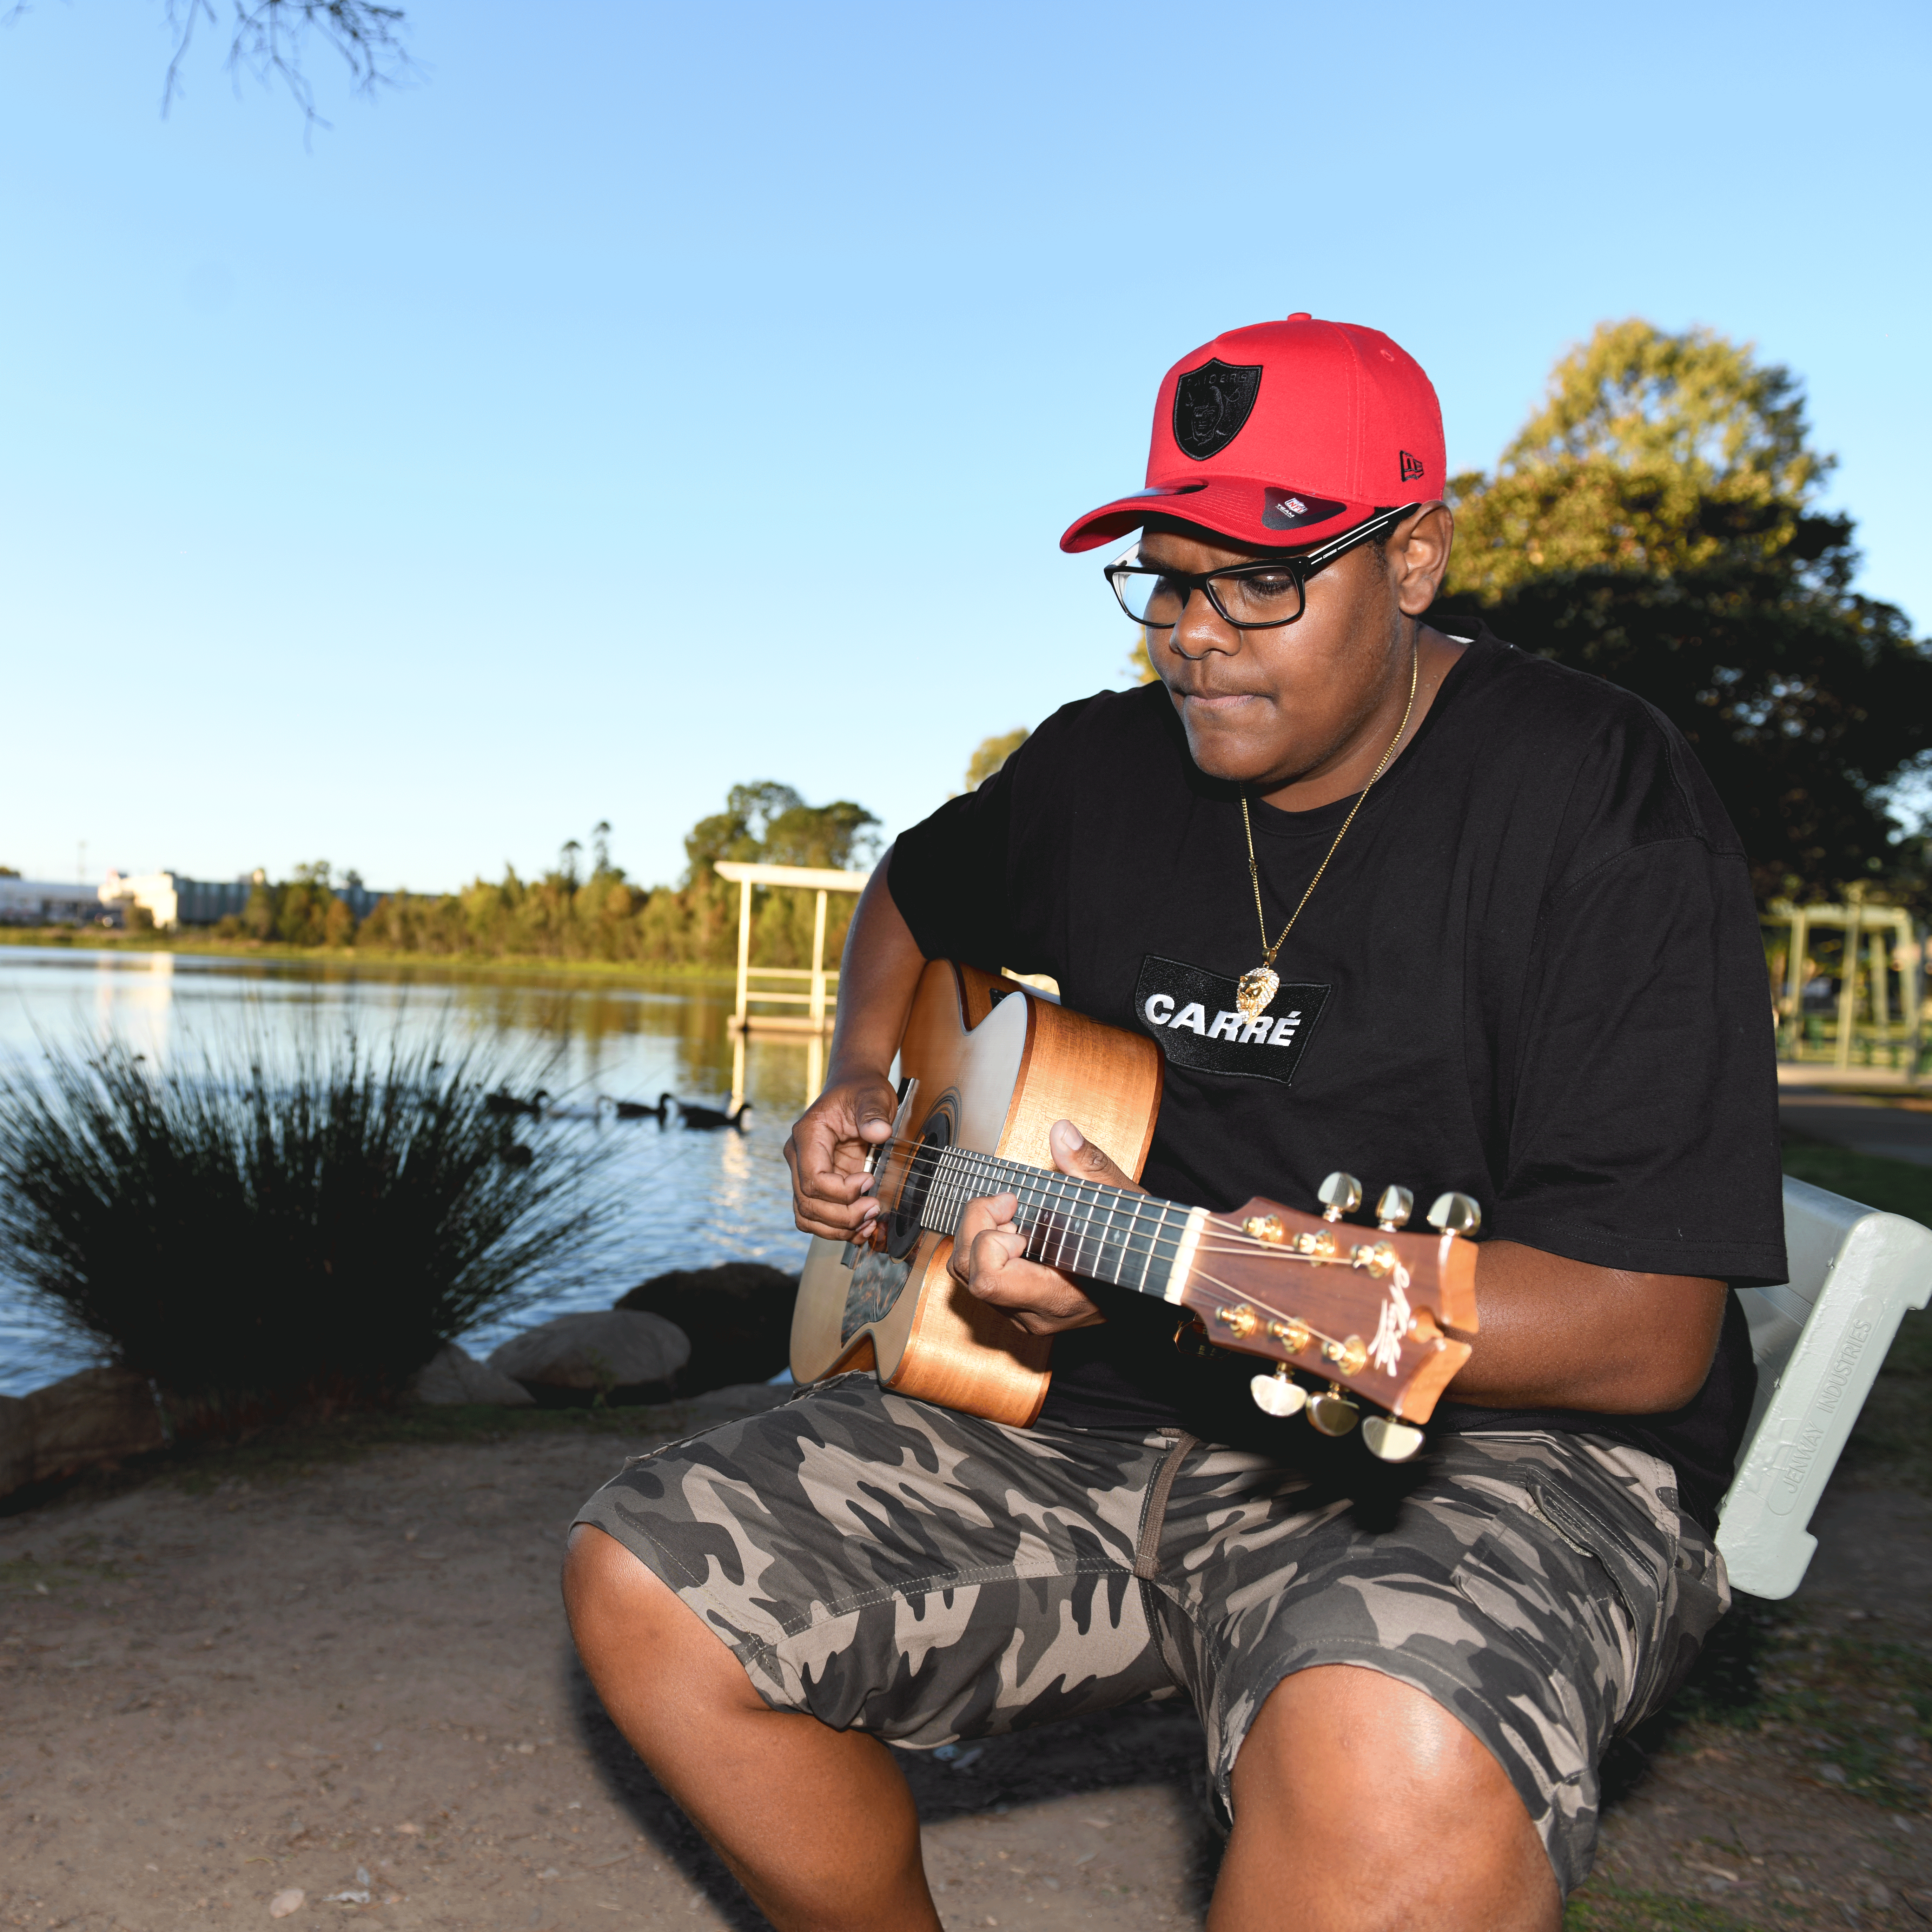 A picture of guitarist Chris Tamwoy, who returns to perform in City of Logan next month.